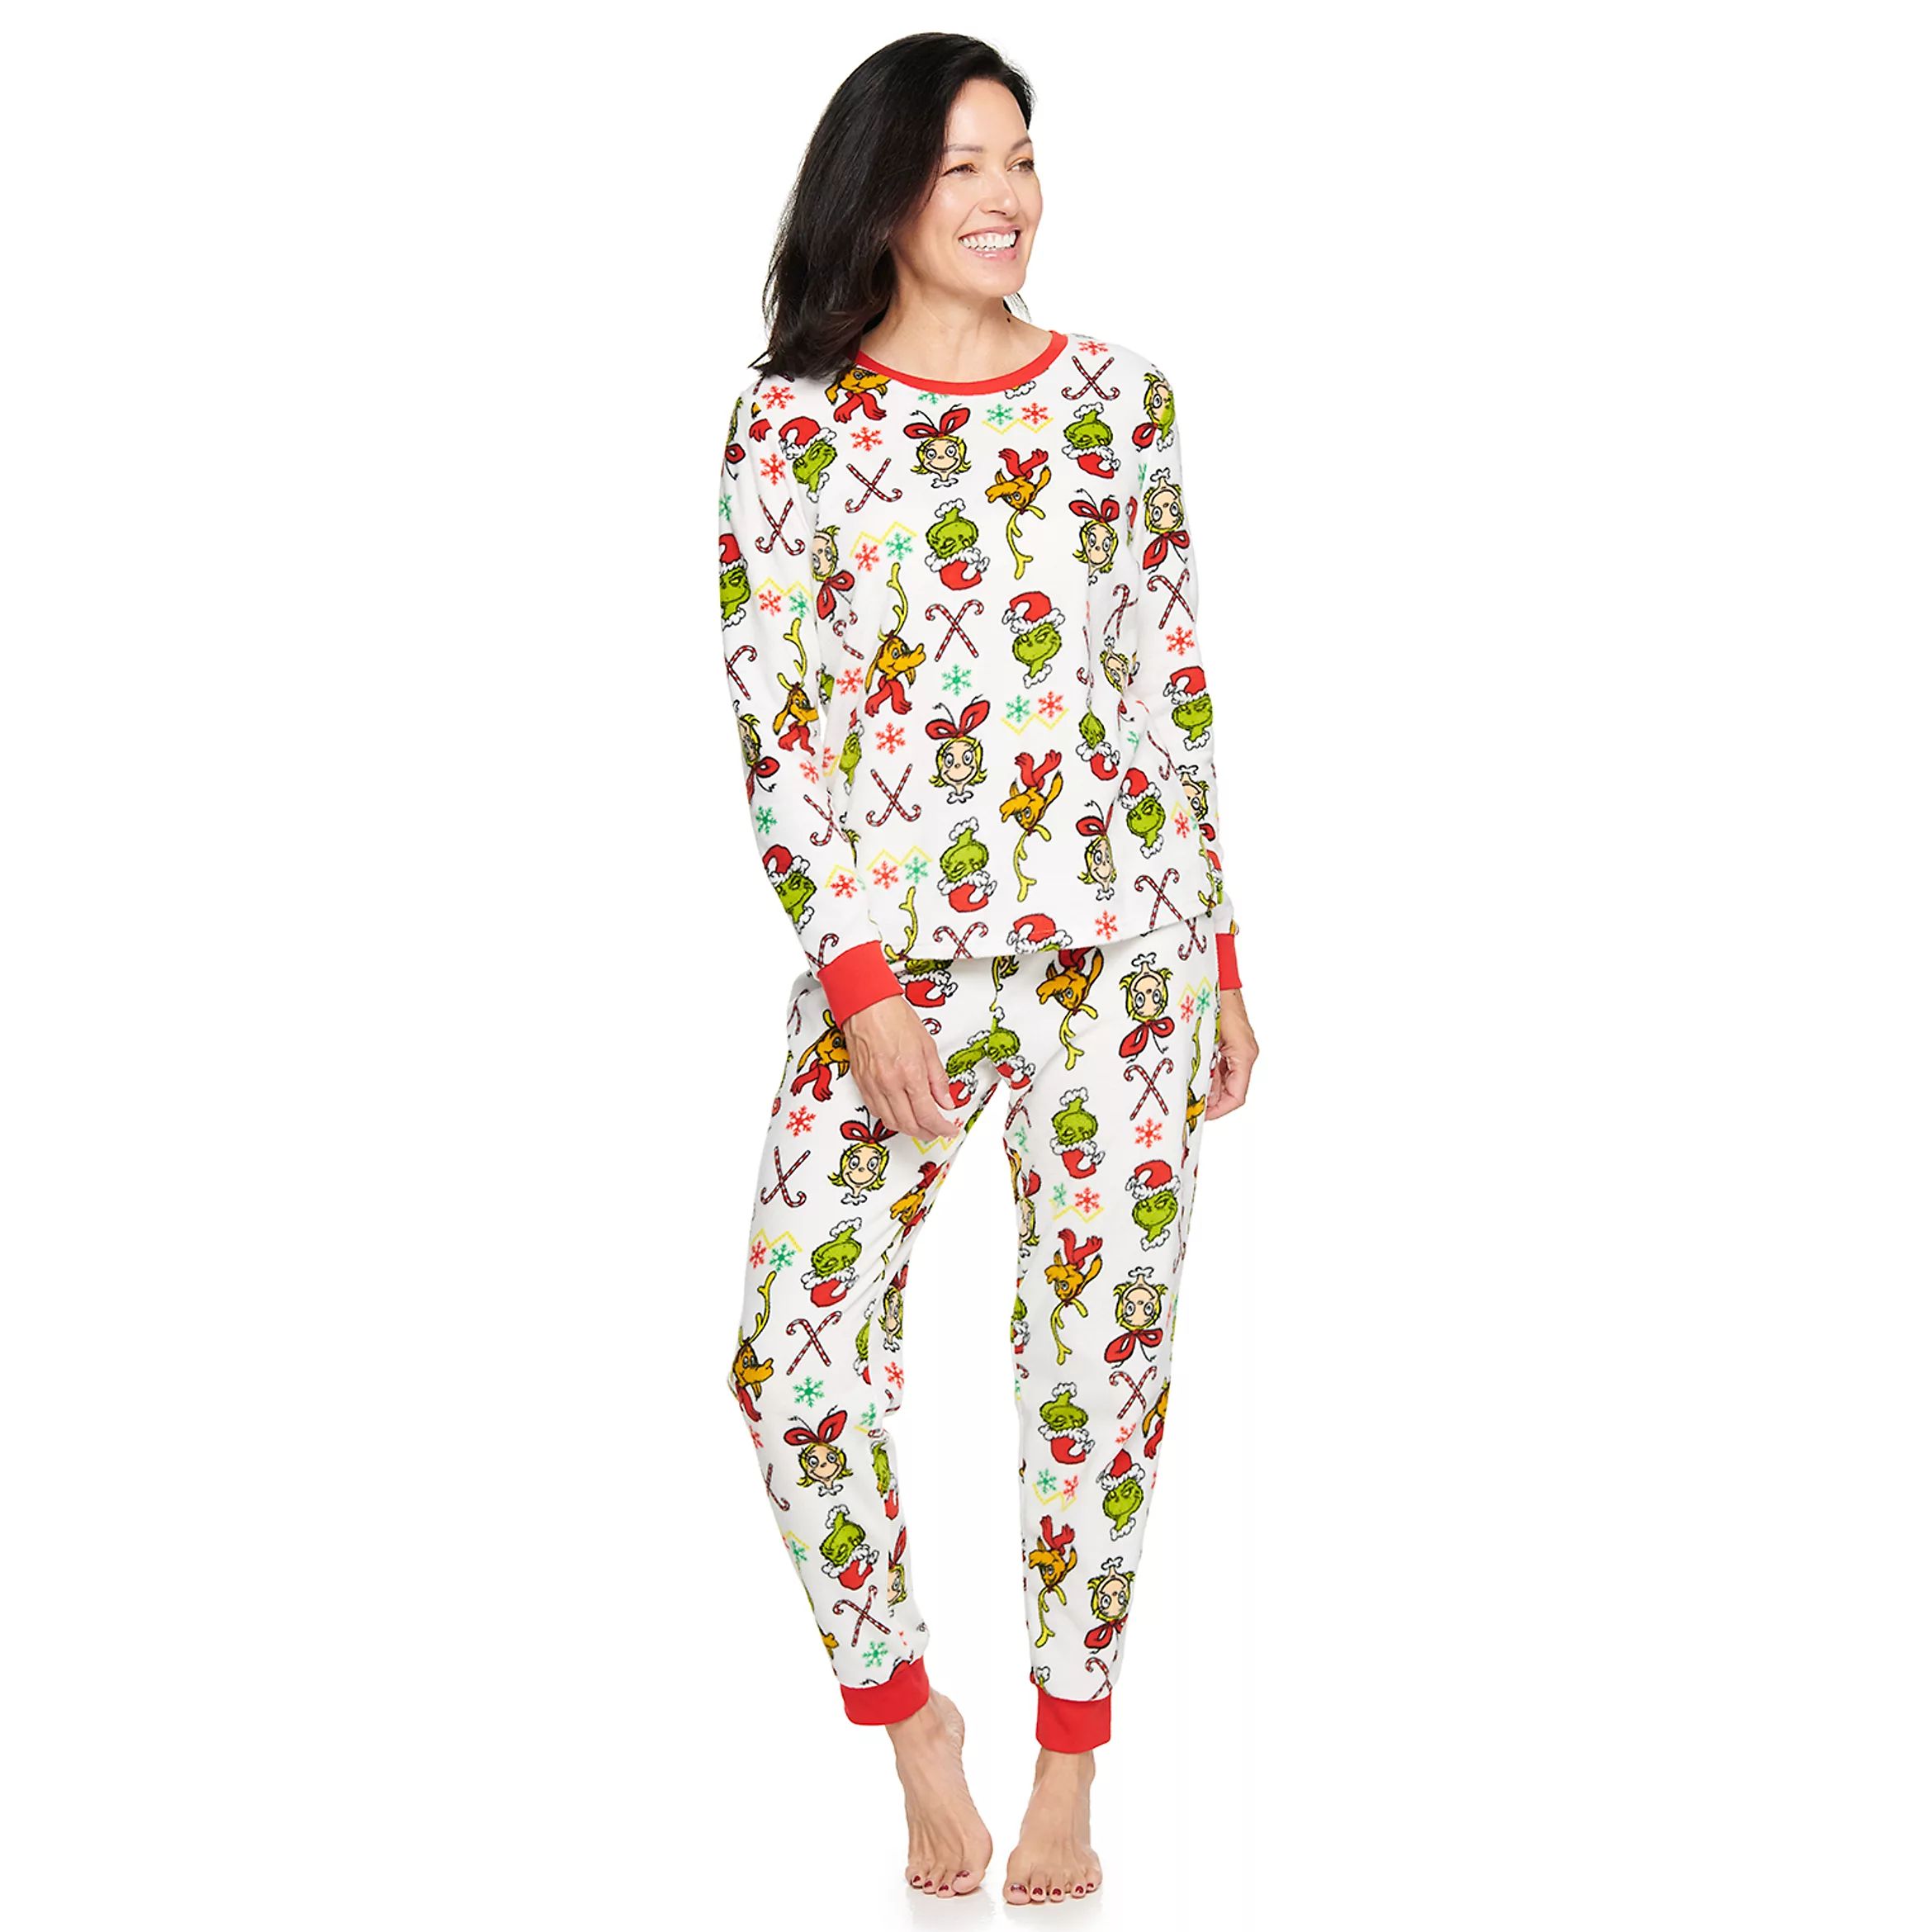 Women's Jammies For Your Families® The Grinch Pajama Set | Kohl's